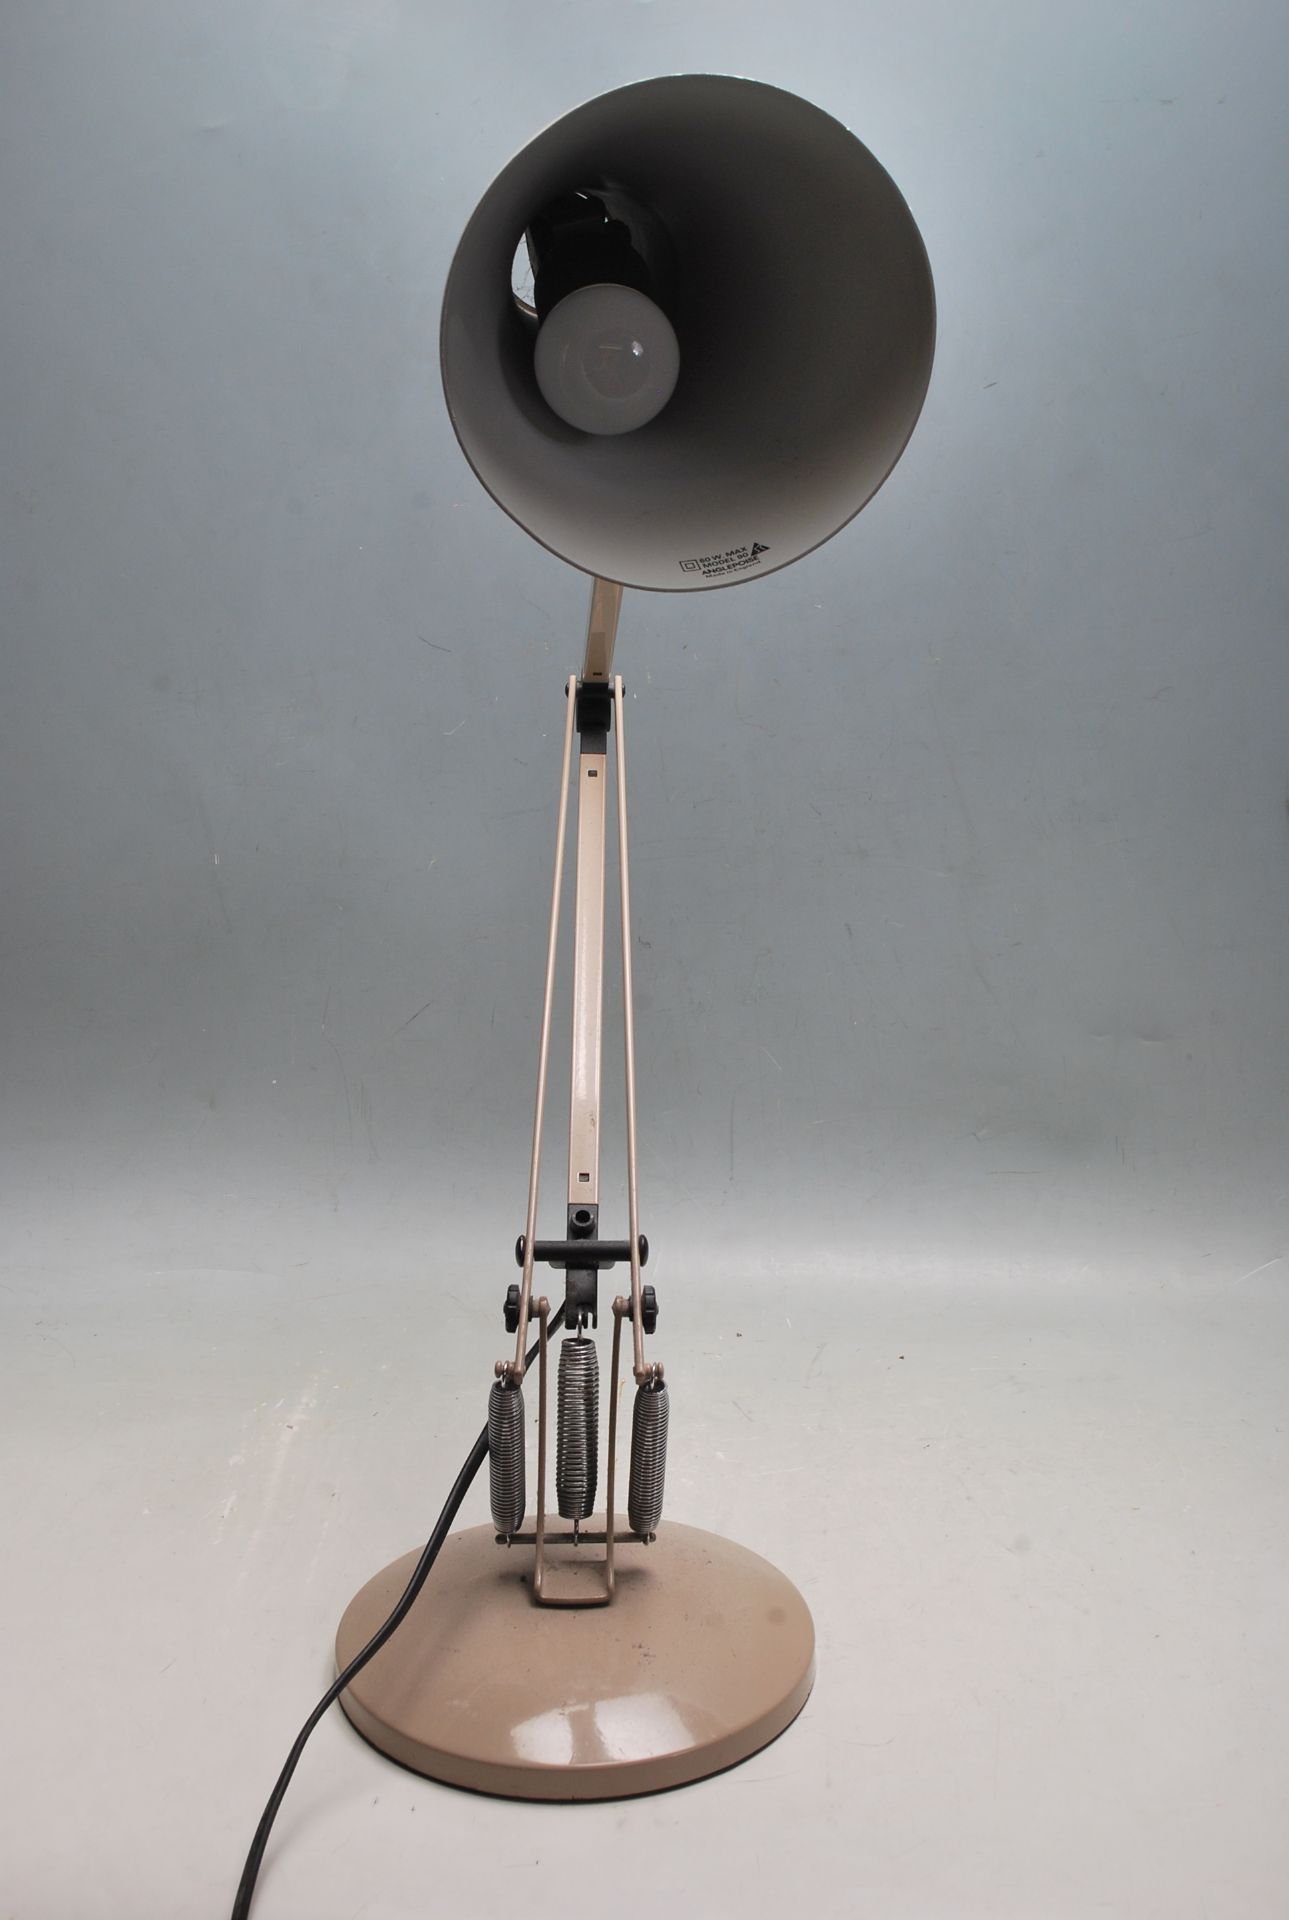 VINTAGE 20TH CENTURY HERBERT TERRY ANGLEPOISE LAMP - Image 11 of 11